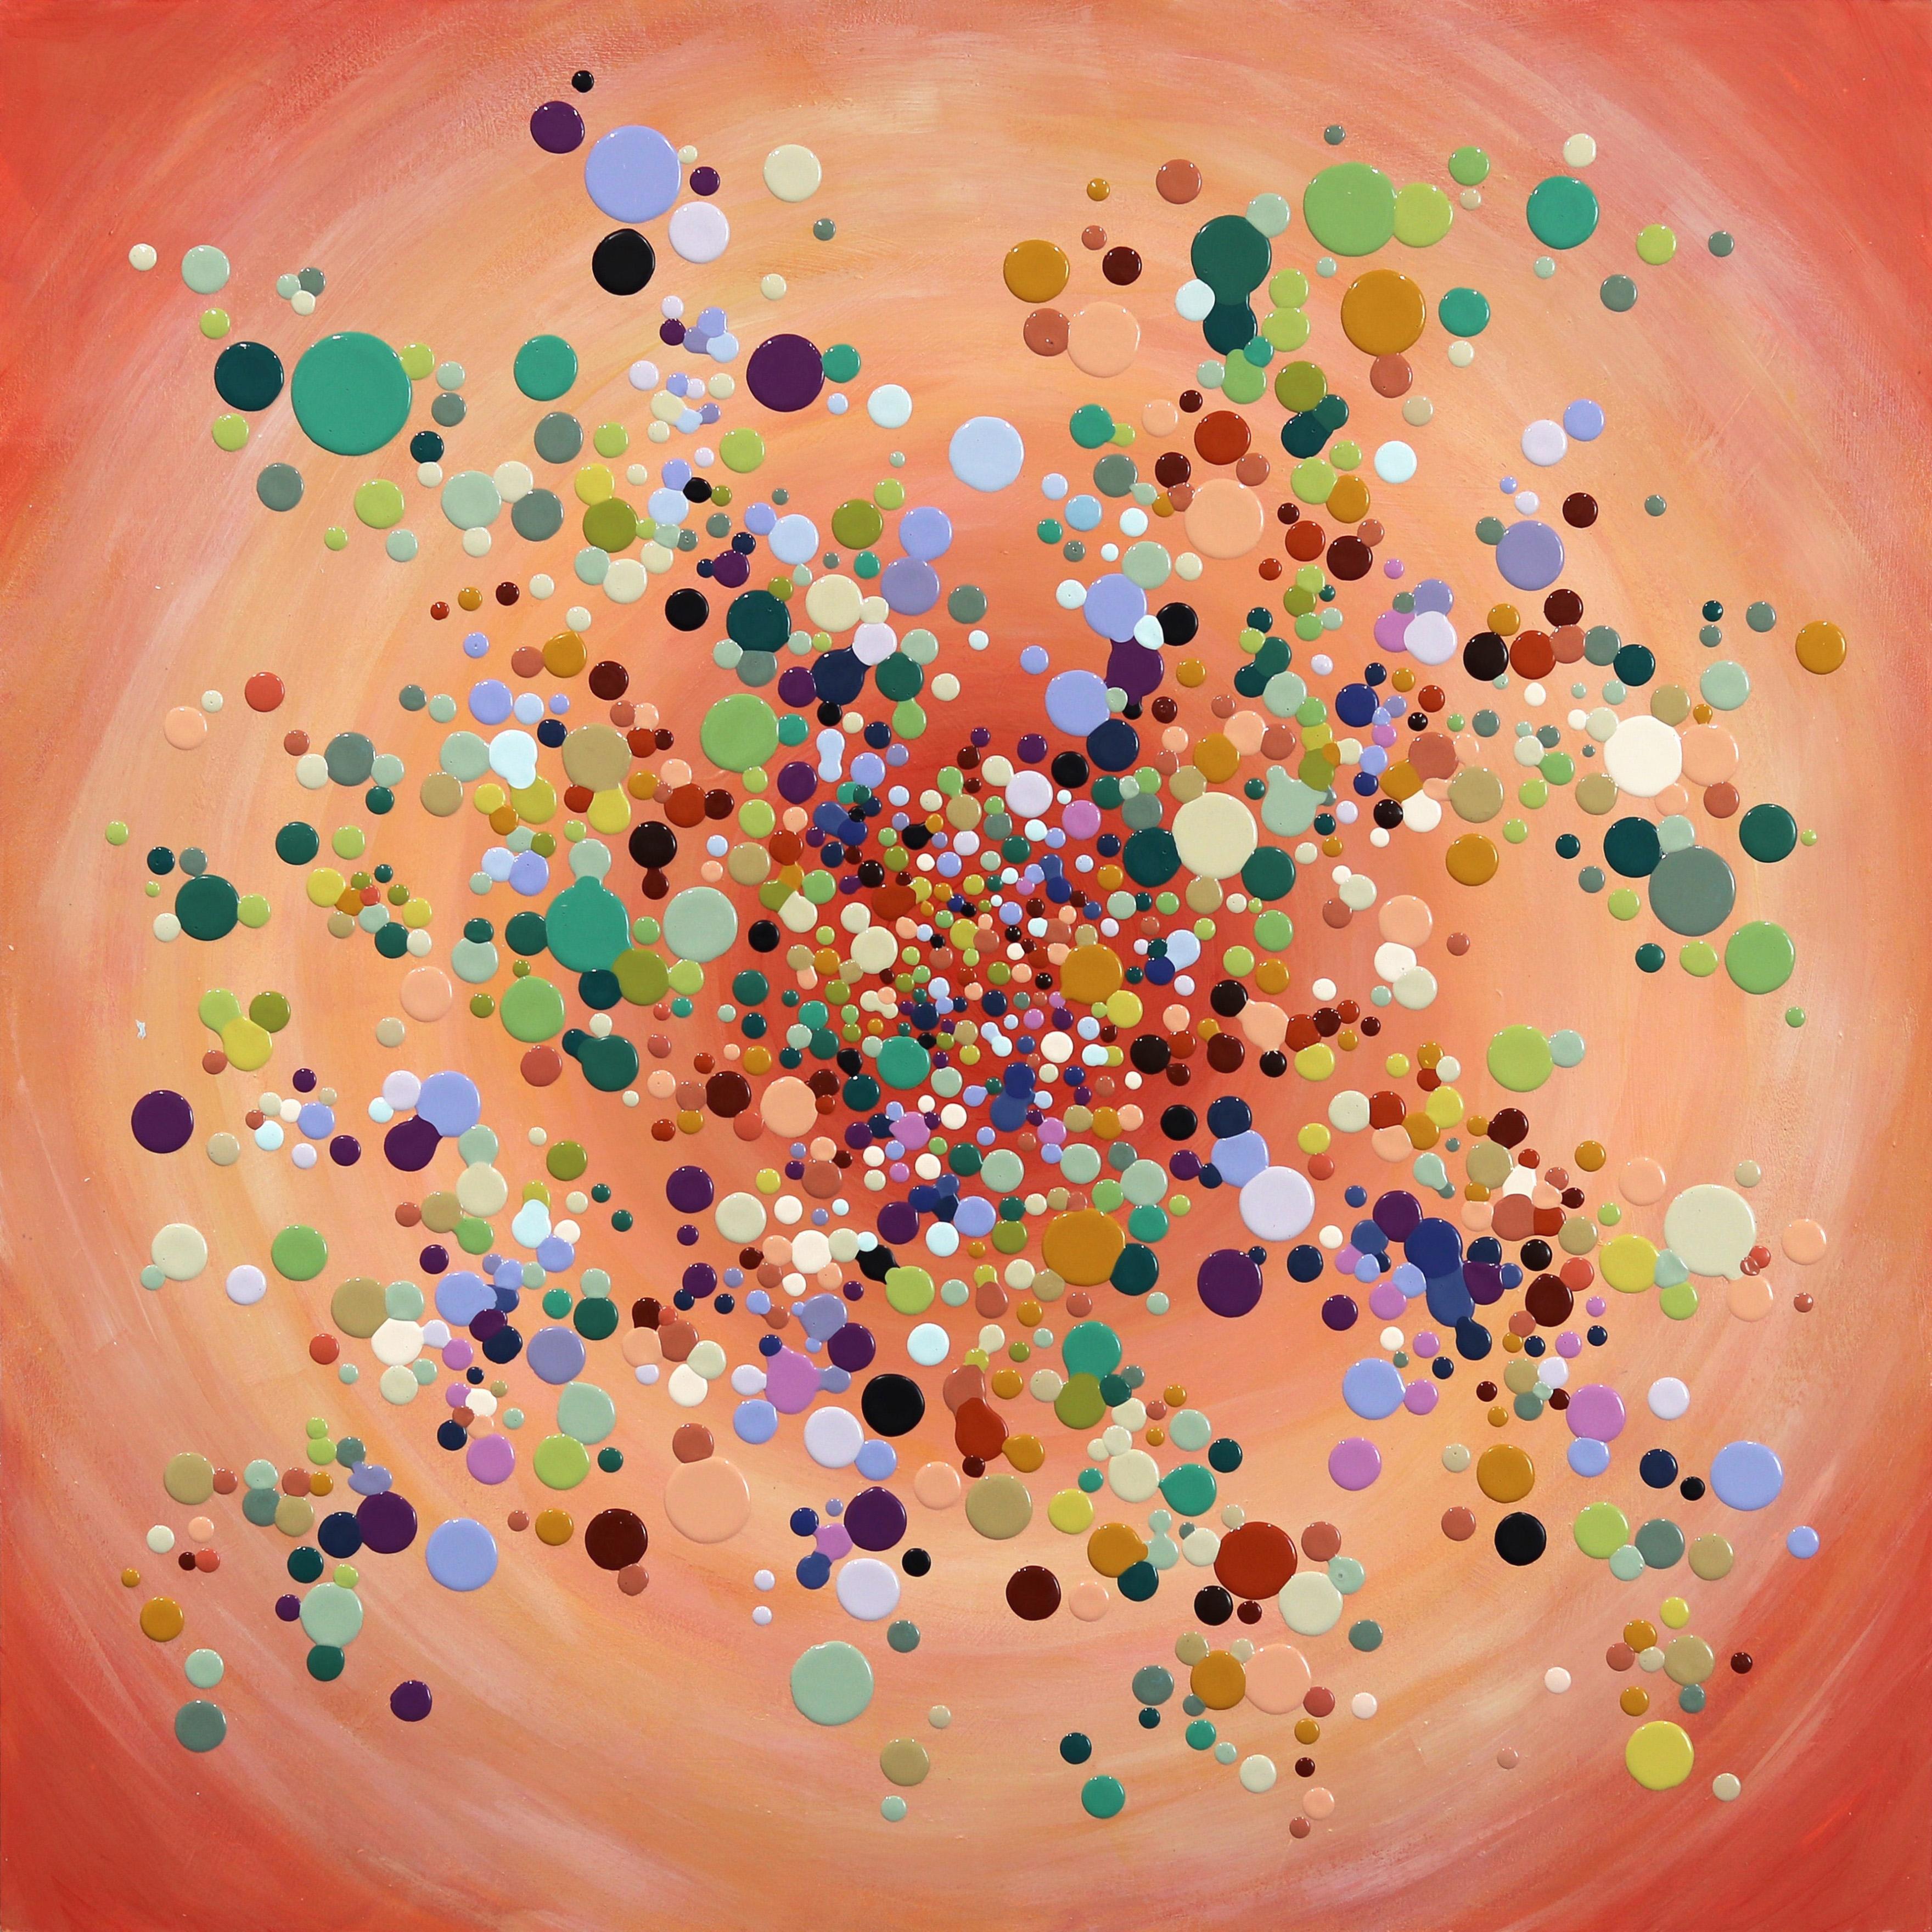 When You Shine - Saturated Colorful Dots Paint Droplets by Kimberly Blackstock